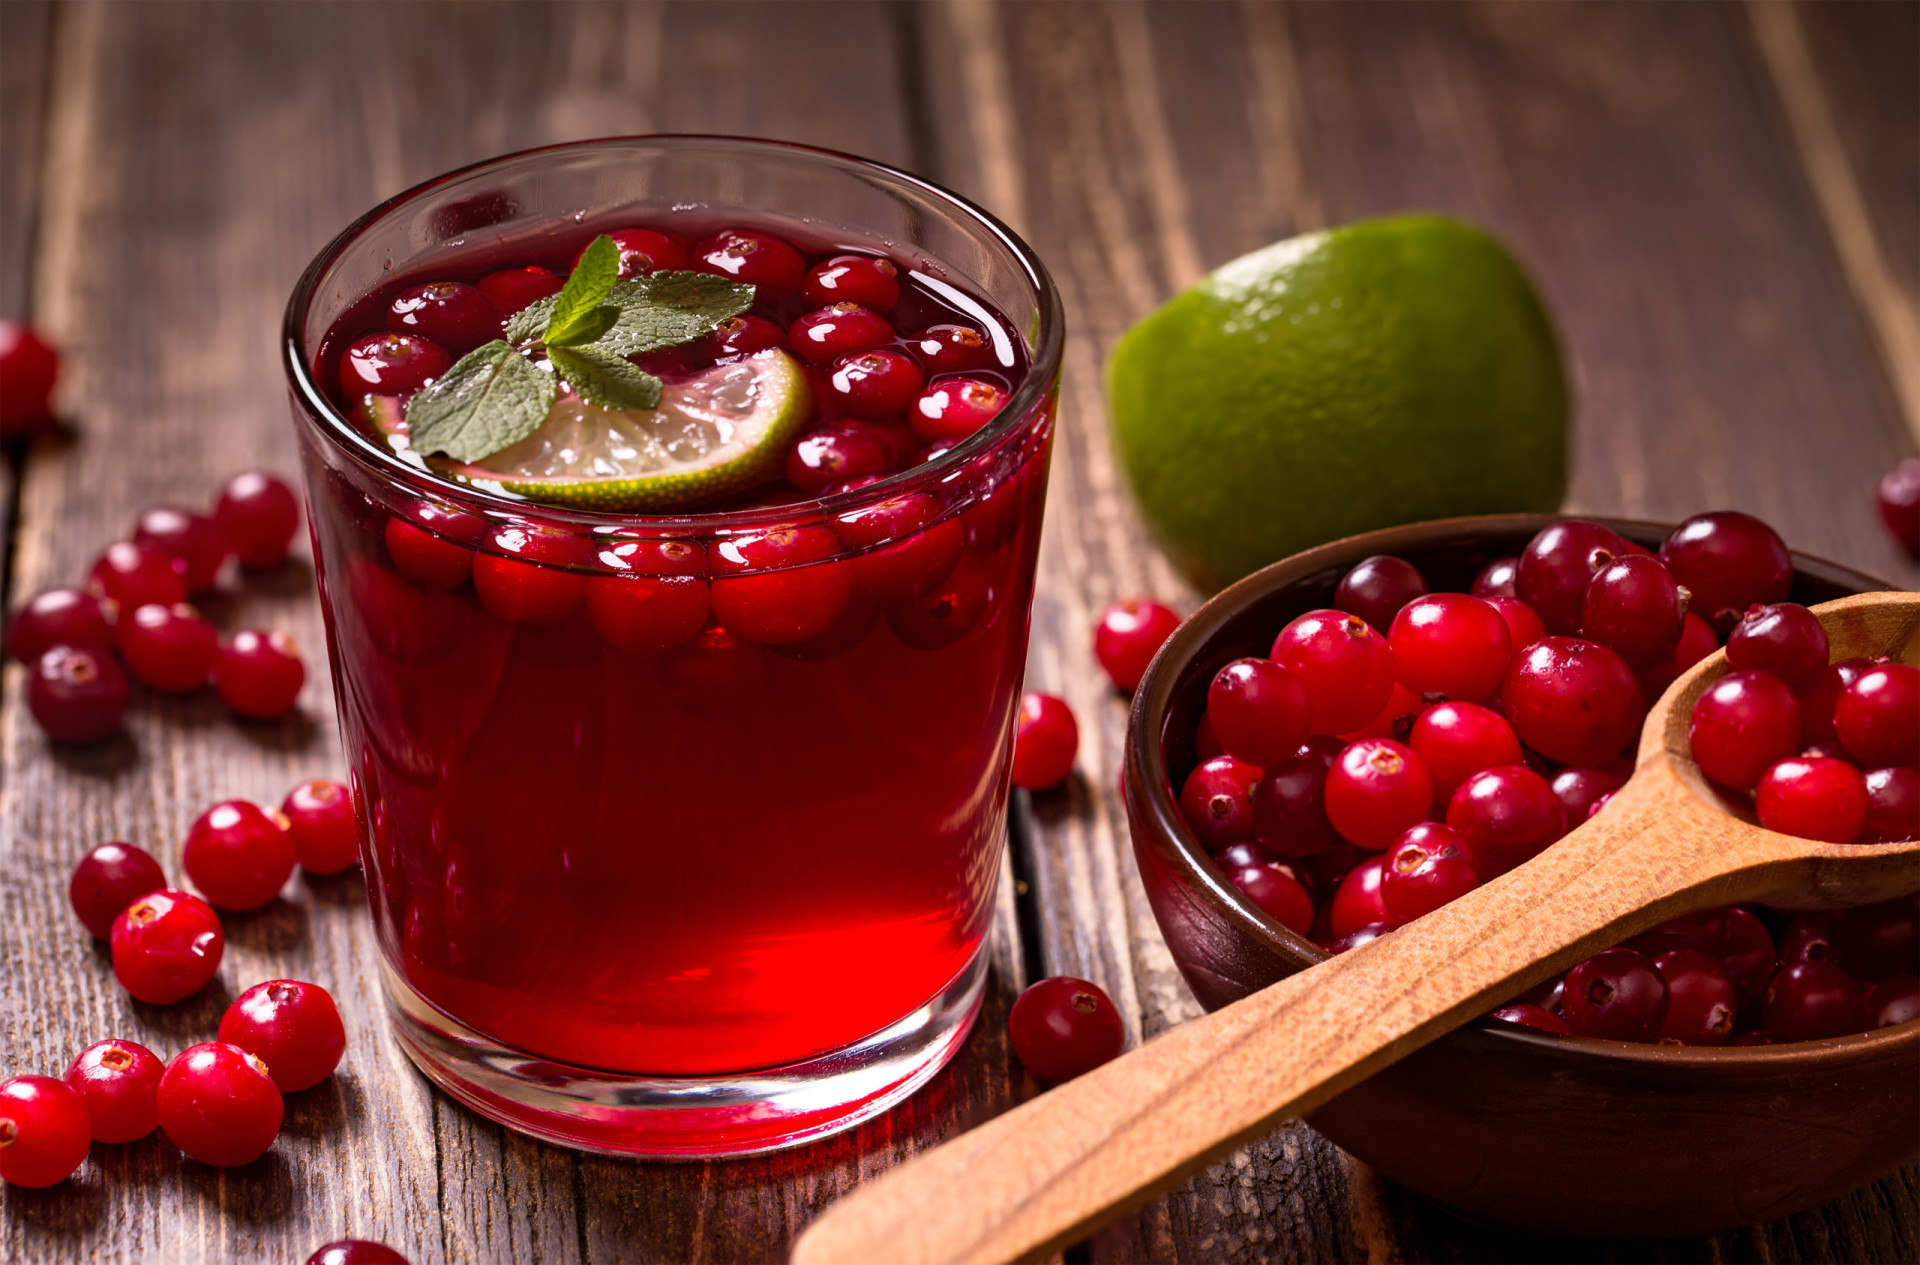 <p>Cranberry (<em>vaccinium macrocarpon</em>) may decrease levels of immunosuppressants in the blood.</p><p><a href="https://www.msn.com/en-us/community/channel/vid-7xx8mnucu55yw63we9va2gwr7uihbxwc68fxqp25x6tg4ftibpra?cvid=94631541bc0f4f89bfd59158d696ad7e">Follow us and access great exclusive content every day</a></p>